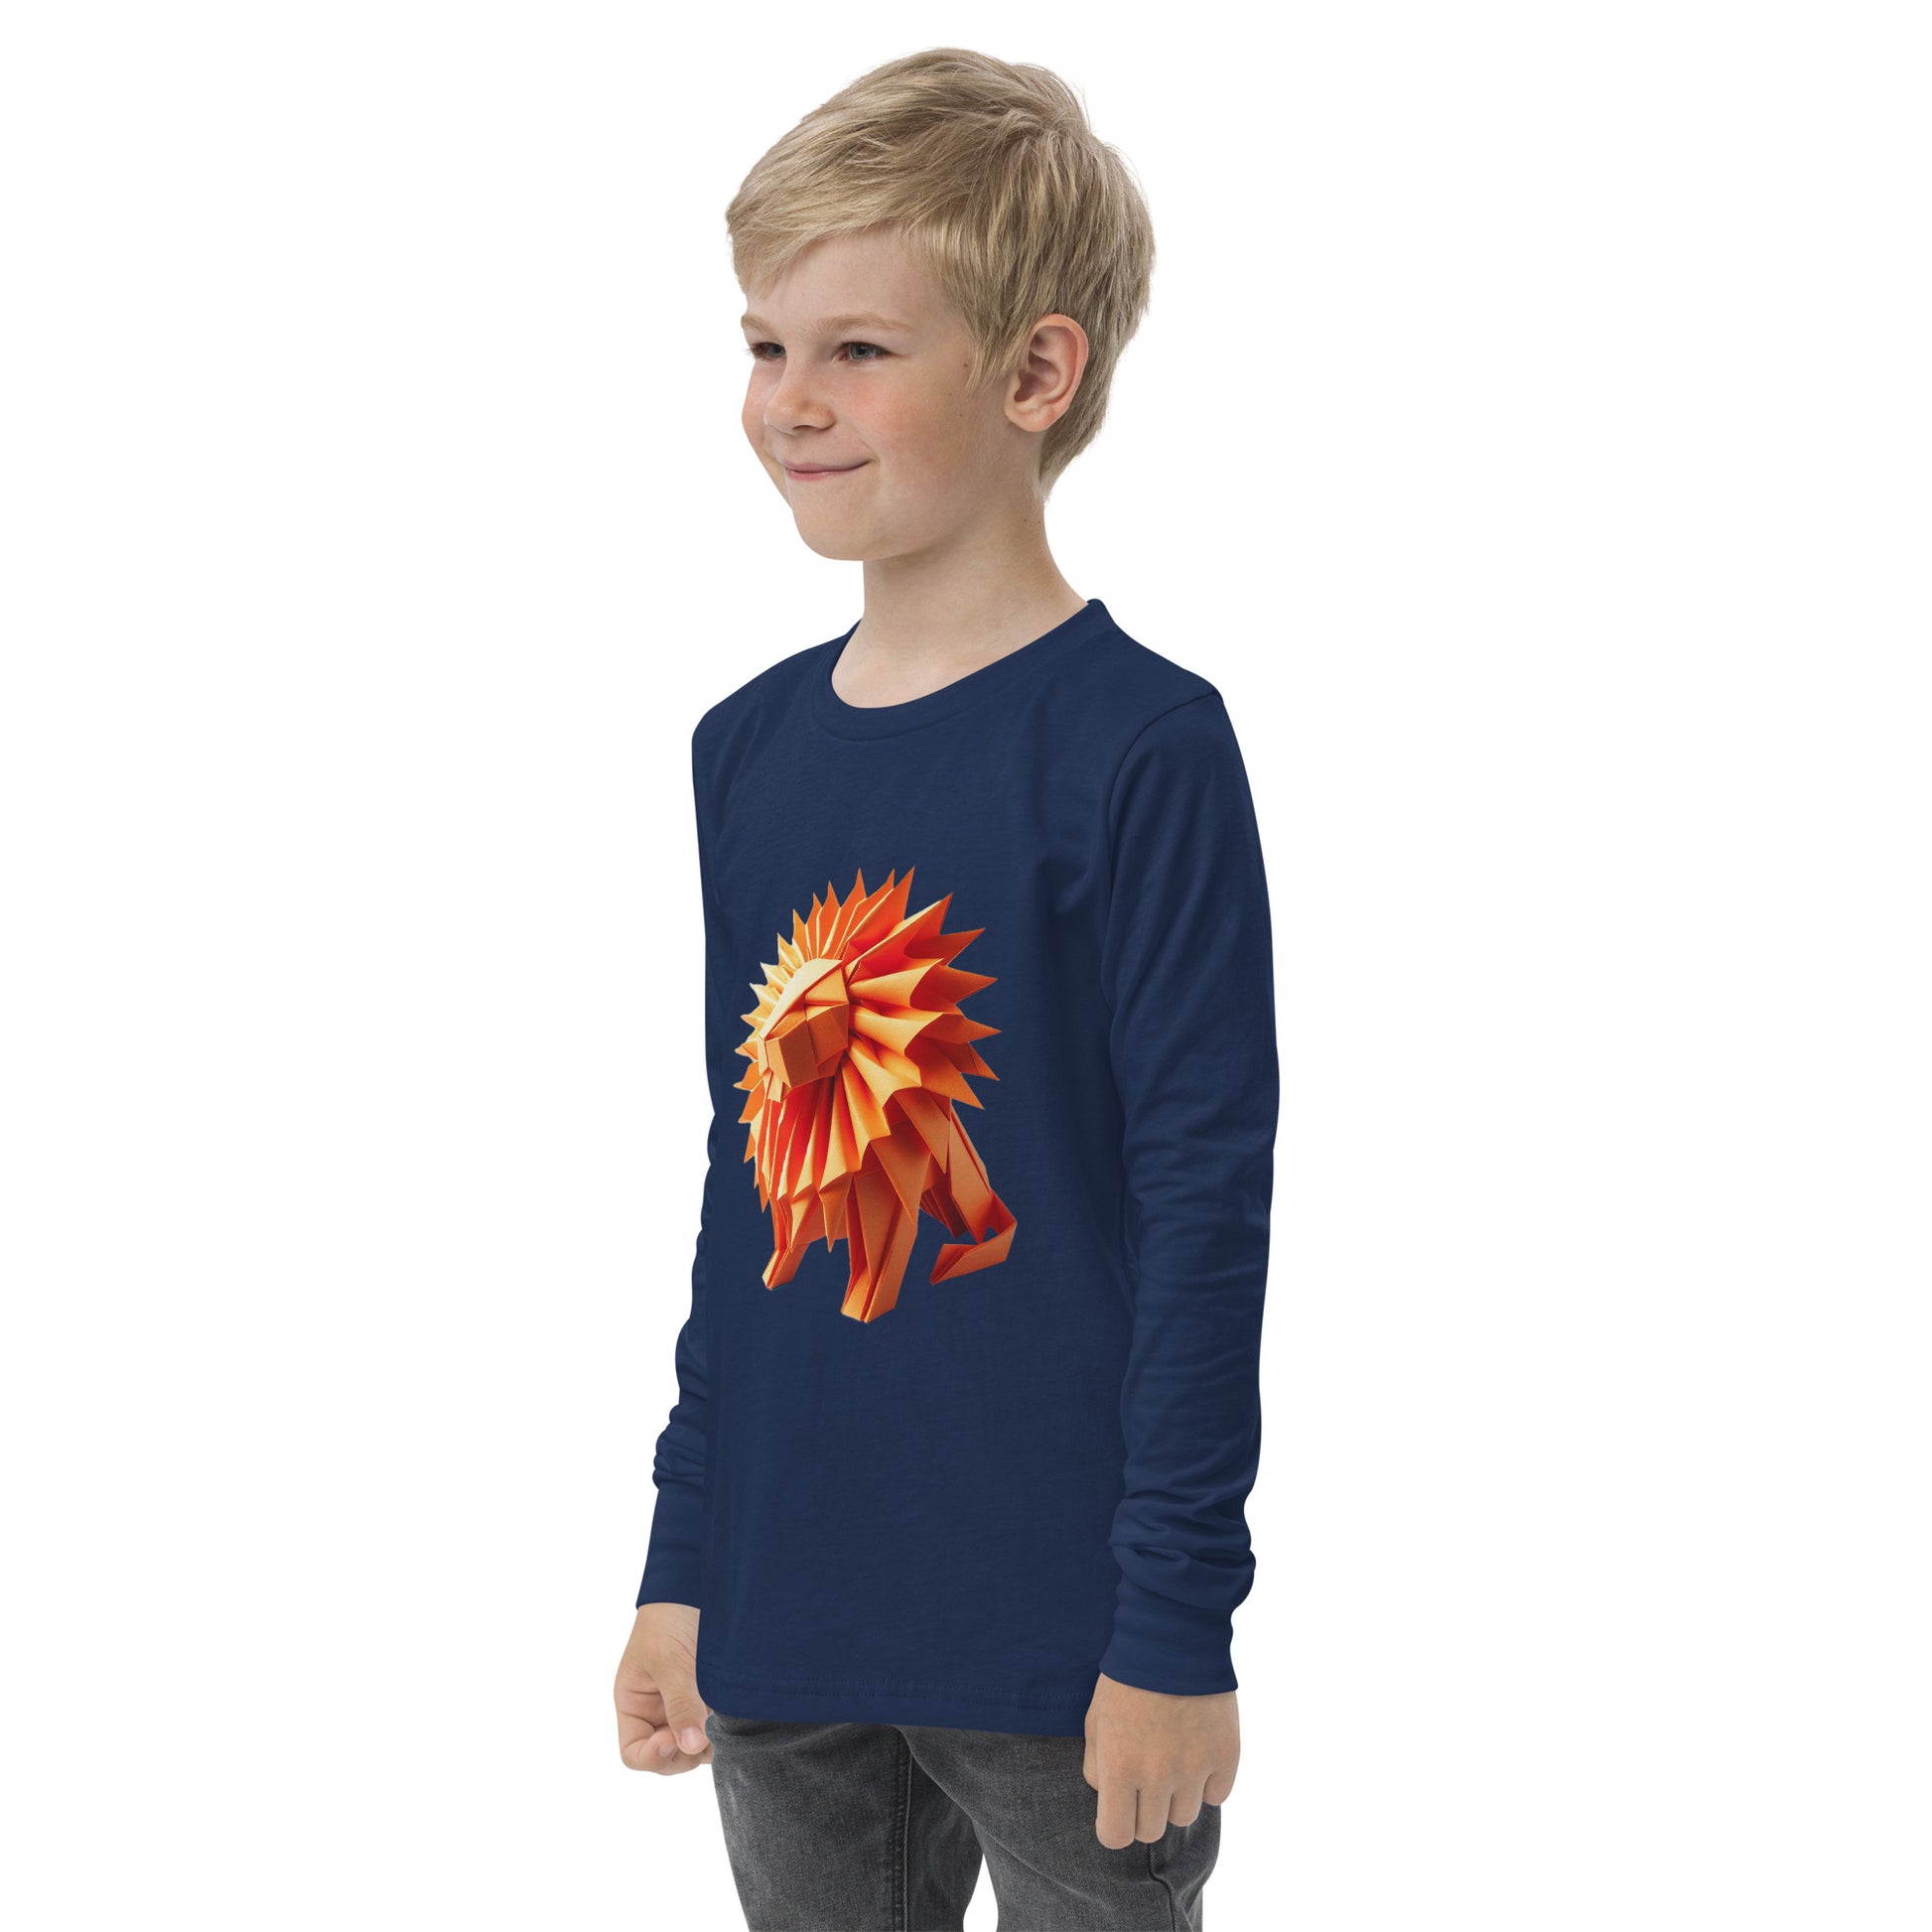 Youth with navy long sleeve T-shirt with print of a lion